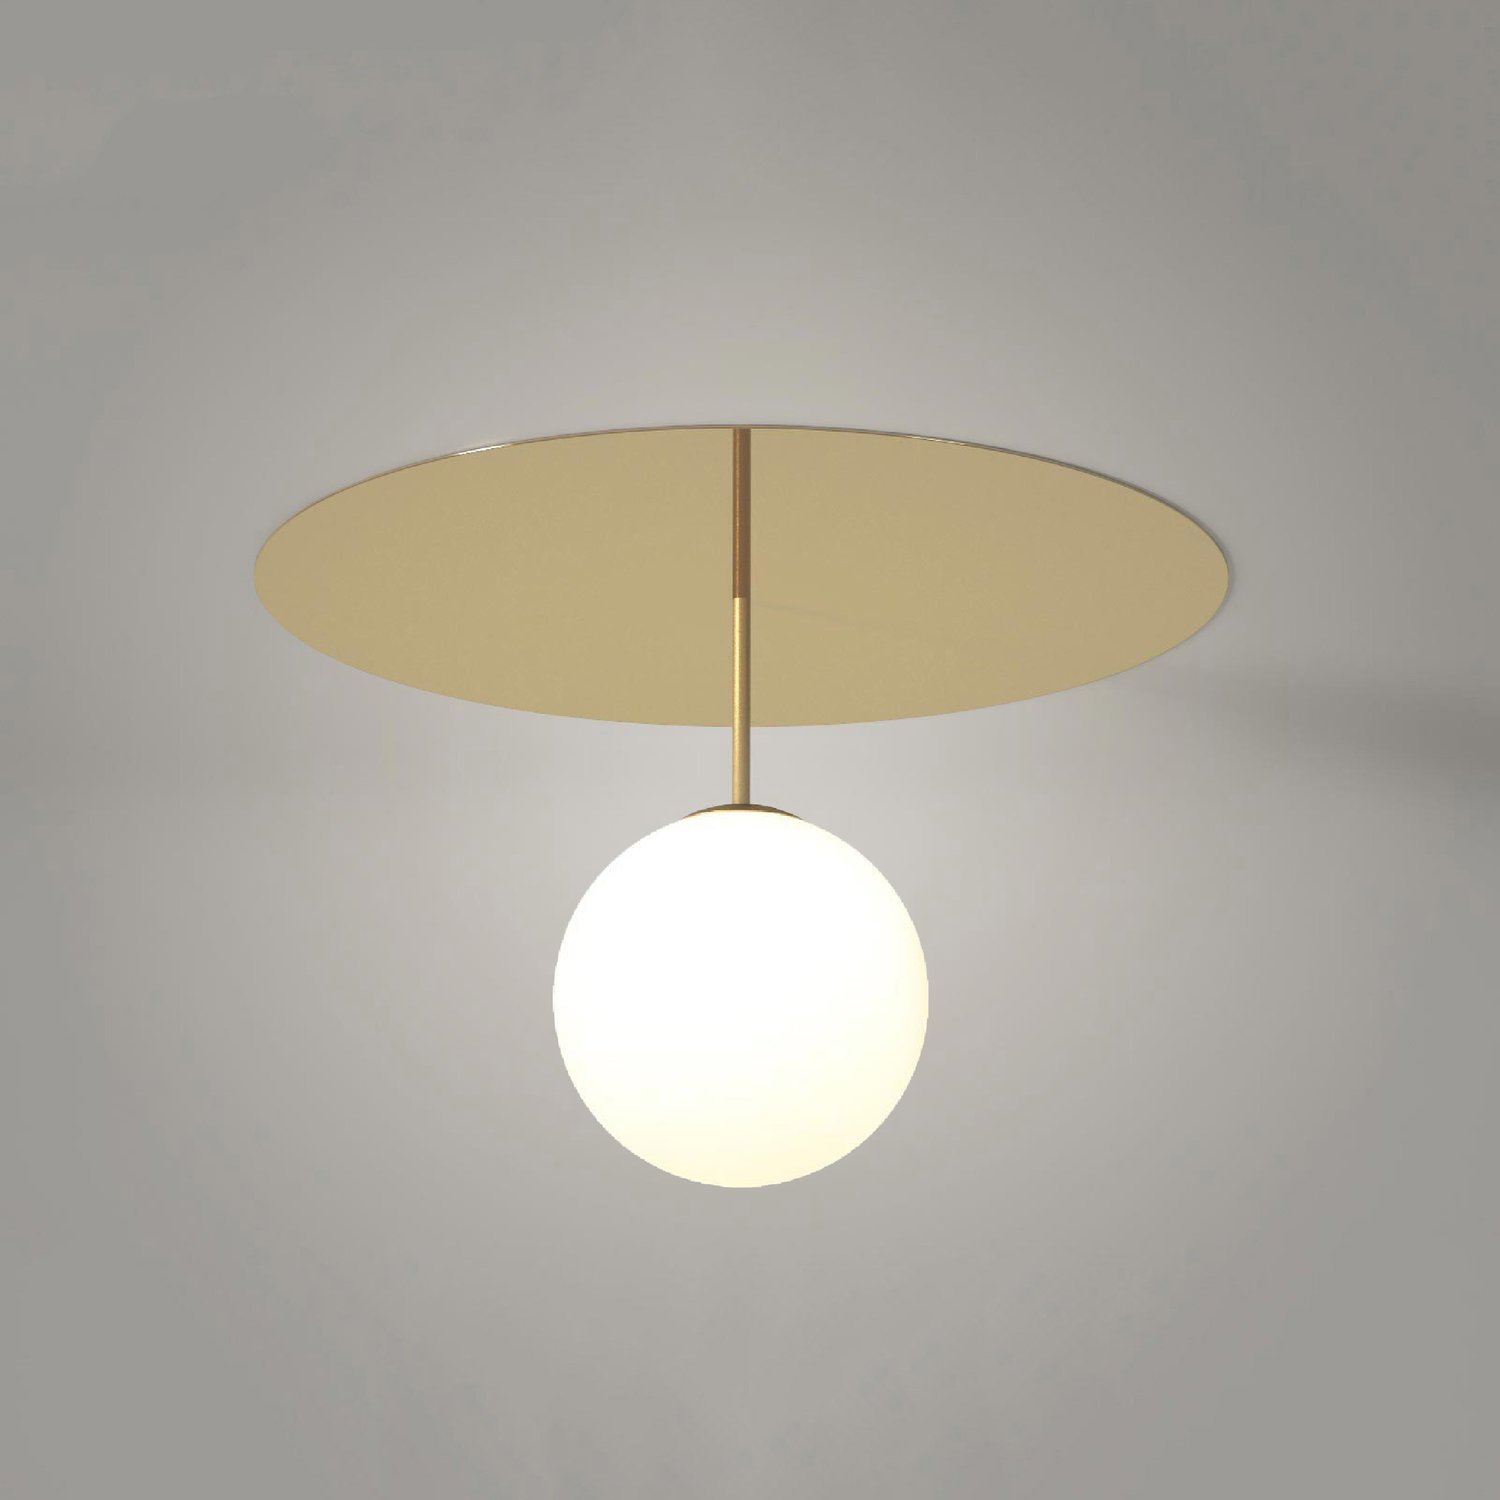 PLATE AND SPHERE CEILING LIGHT / OPTION 2 / SMALL 49cm